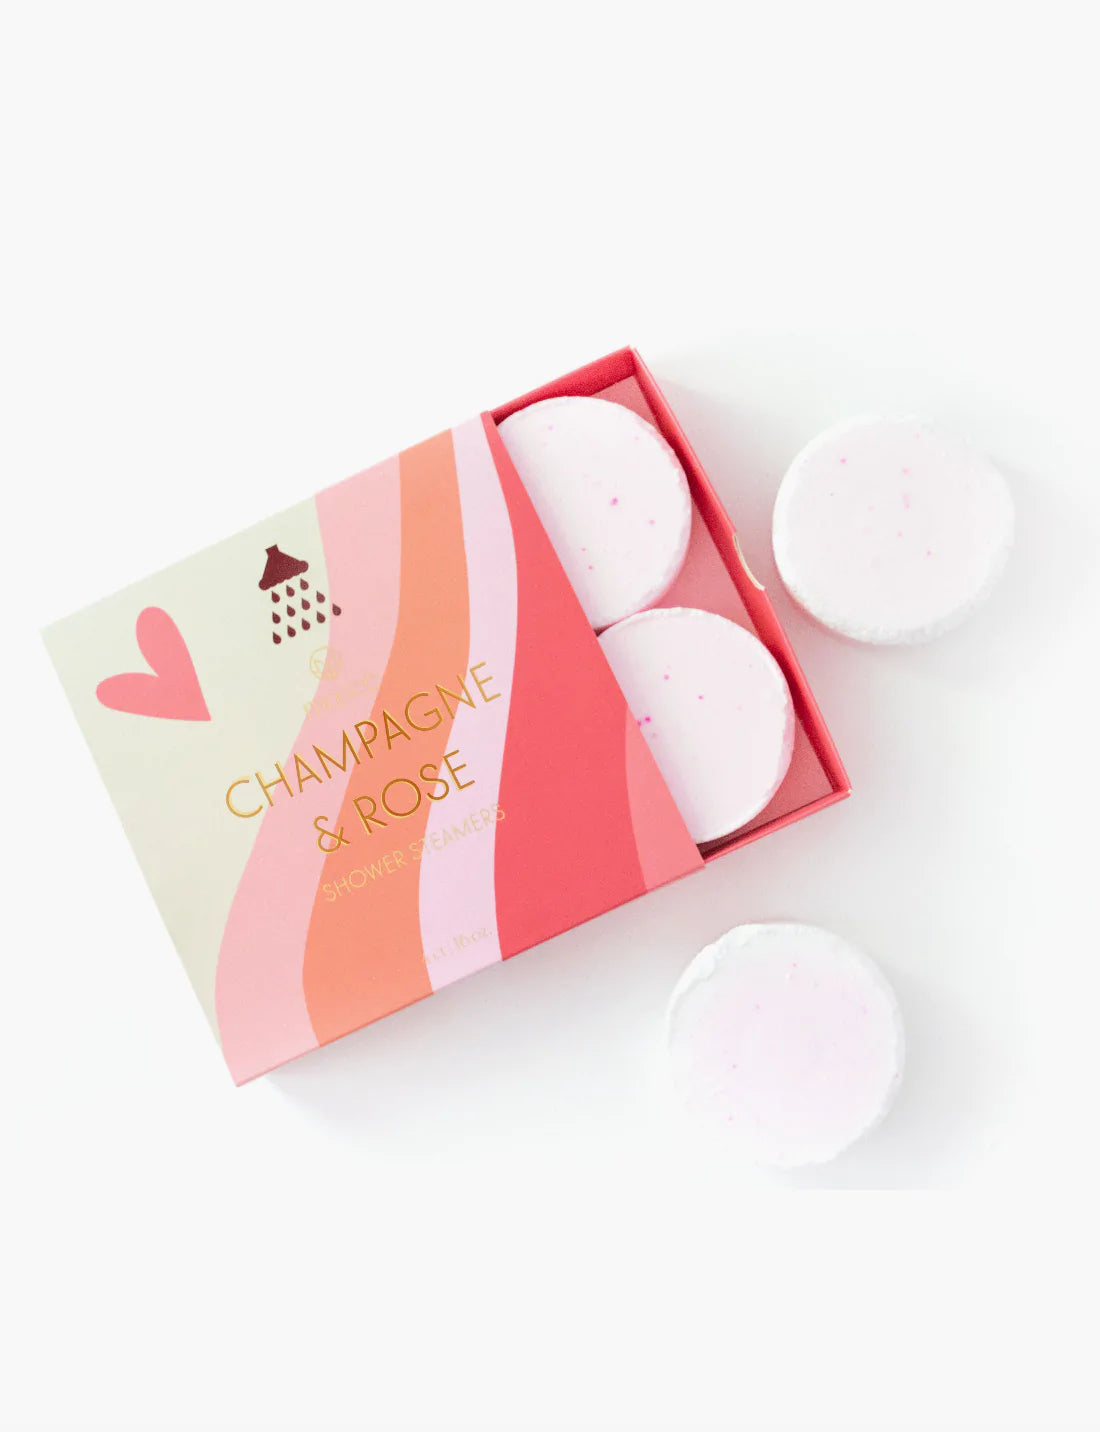 MUSEE Shower Steamers Champagne & Rose